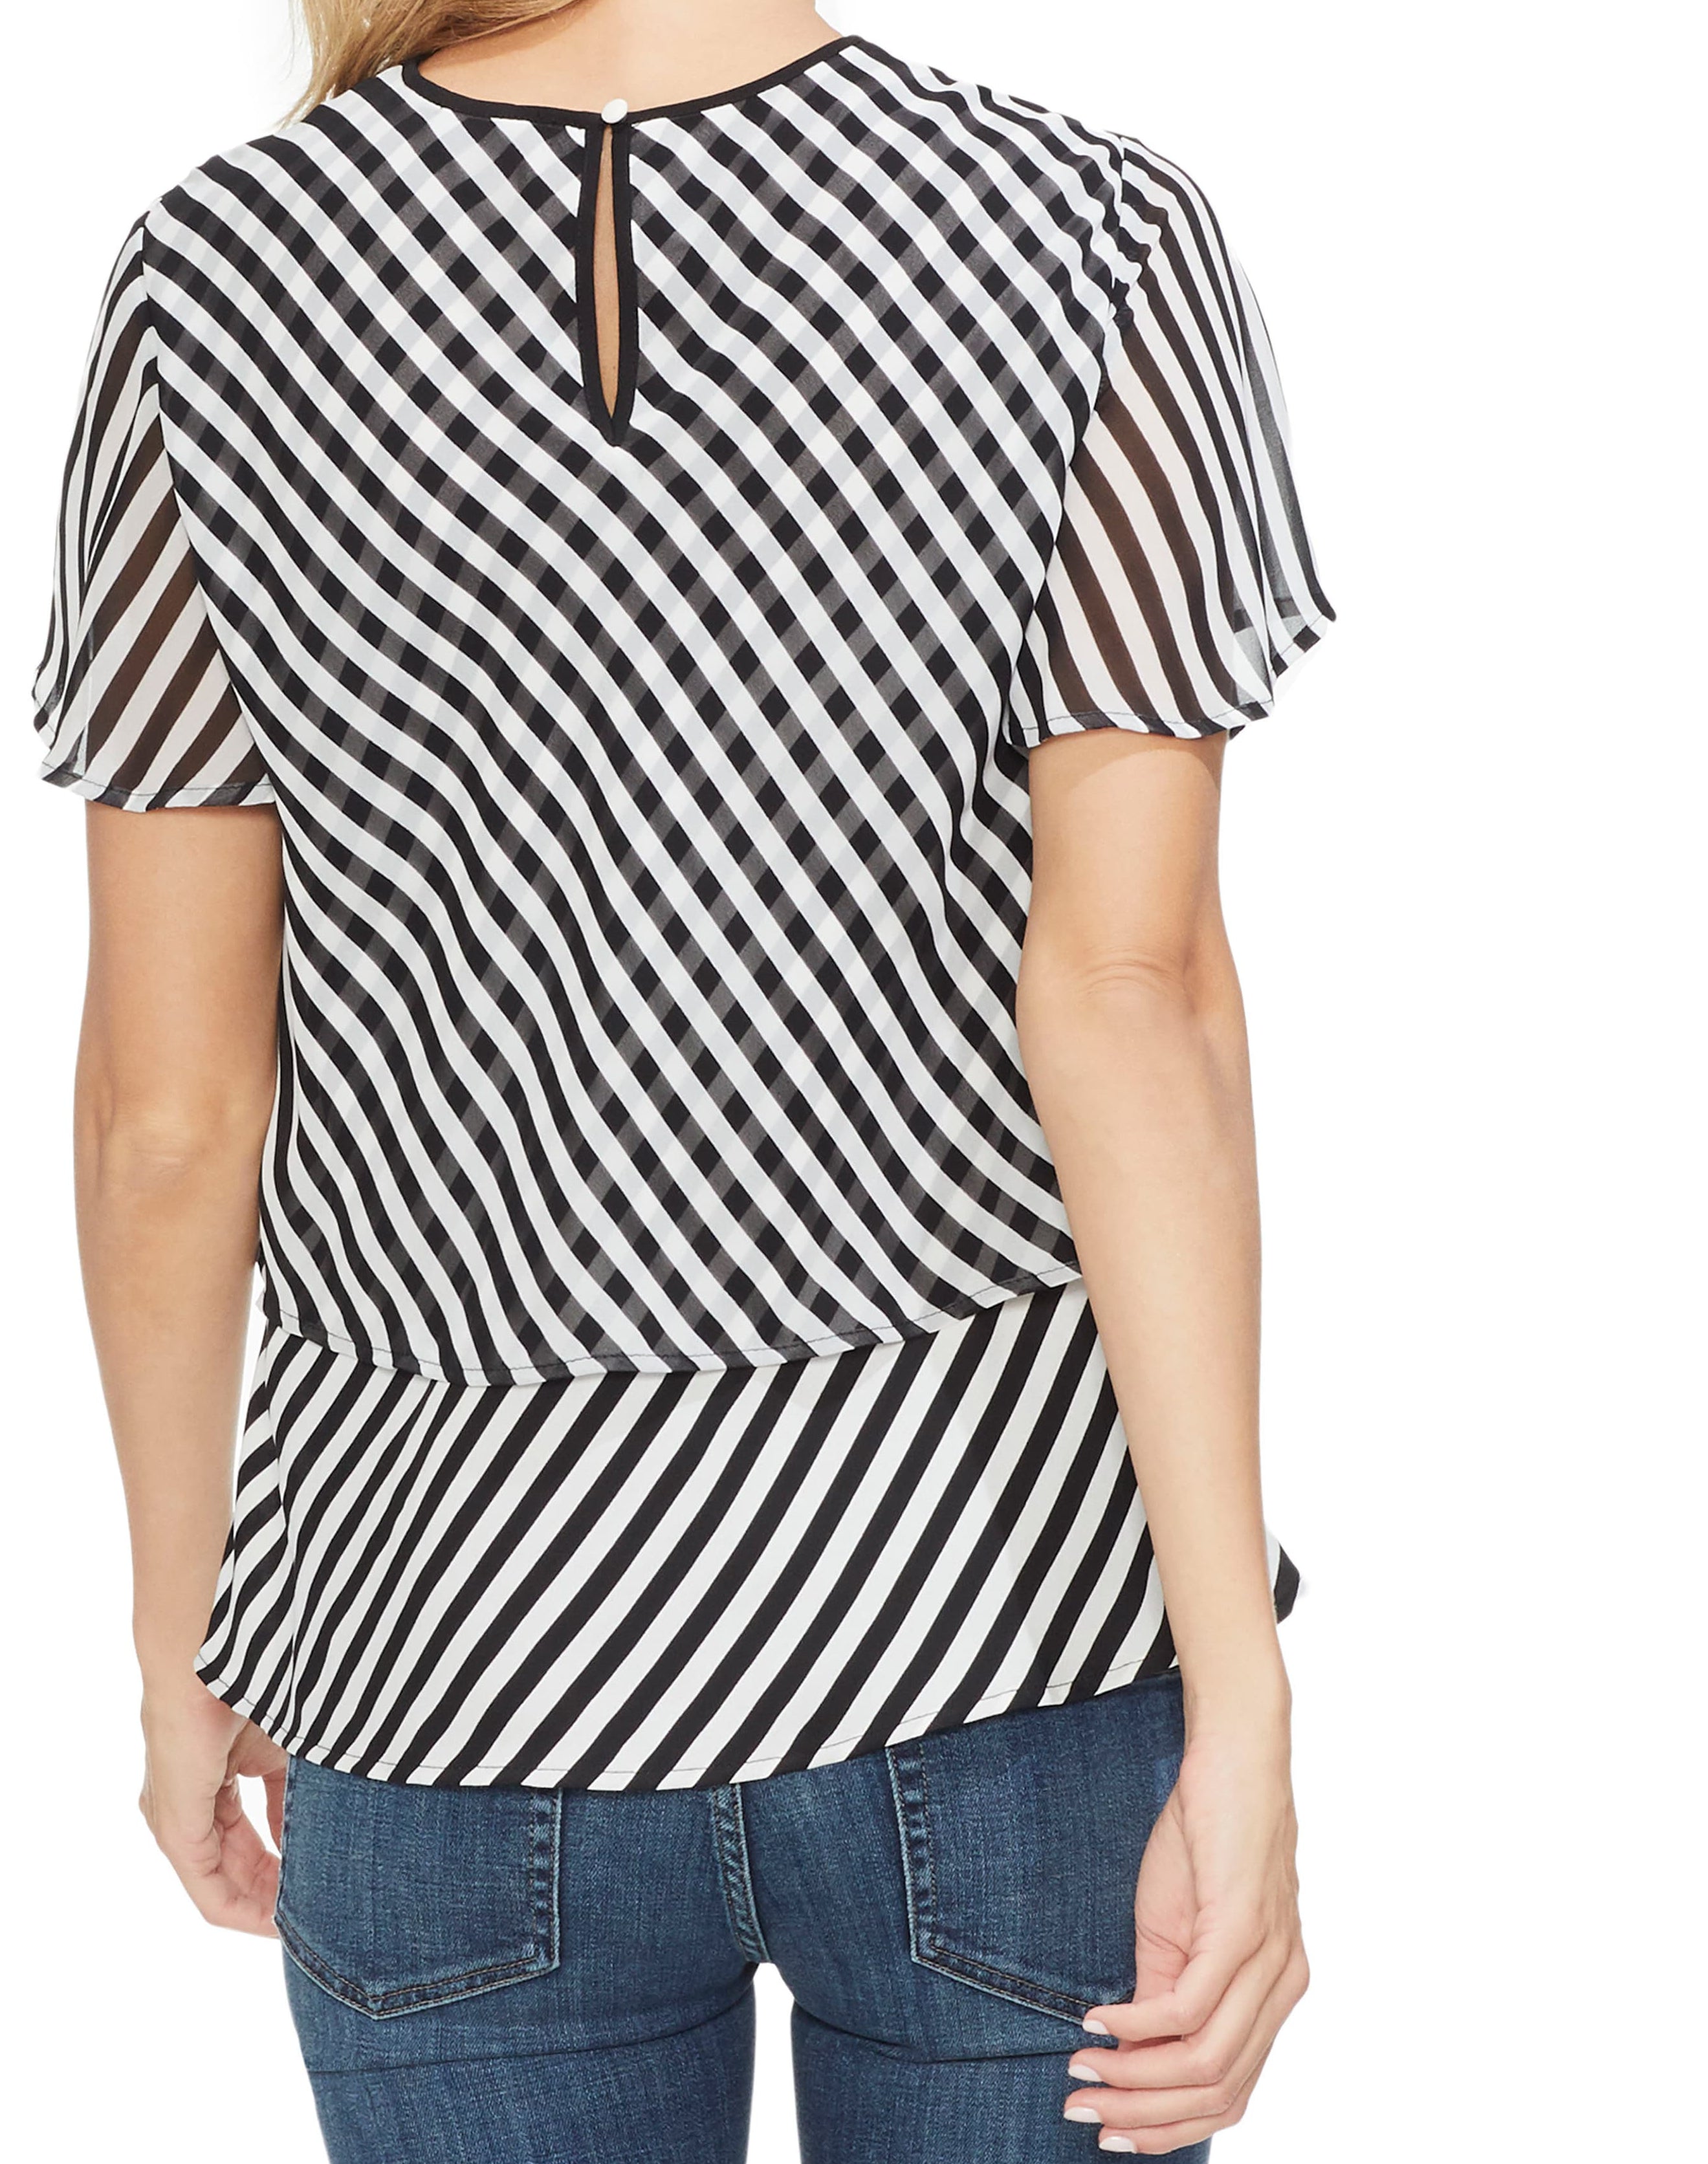 Vince Camuto Womens Striped Popover Top